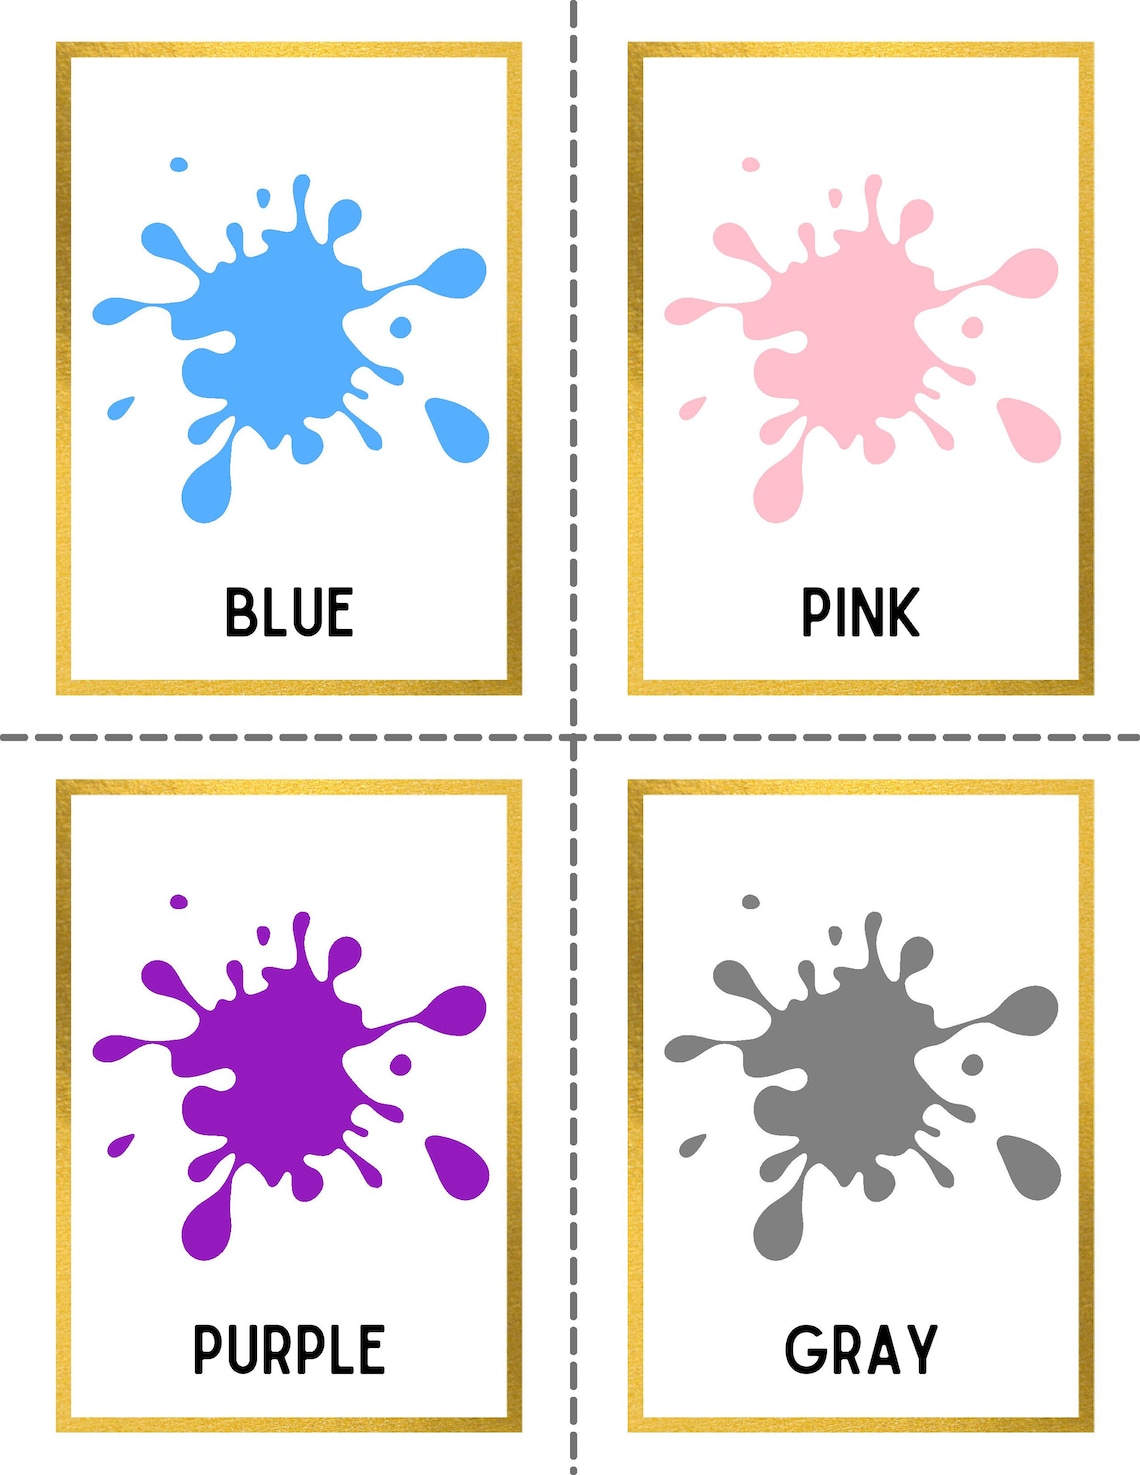 free-printable-color-flash-cards-for-toddlers-help-kids-learn-colors-preschool-flash-cards